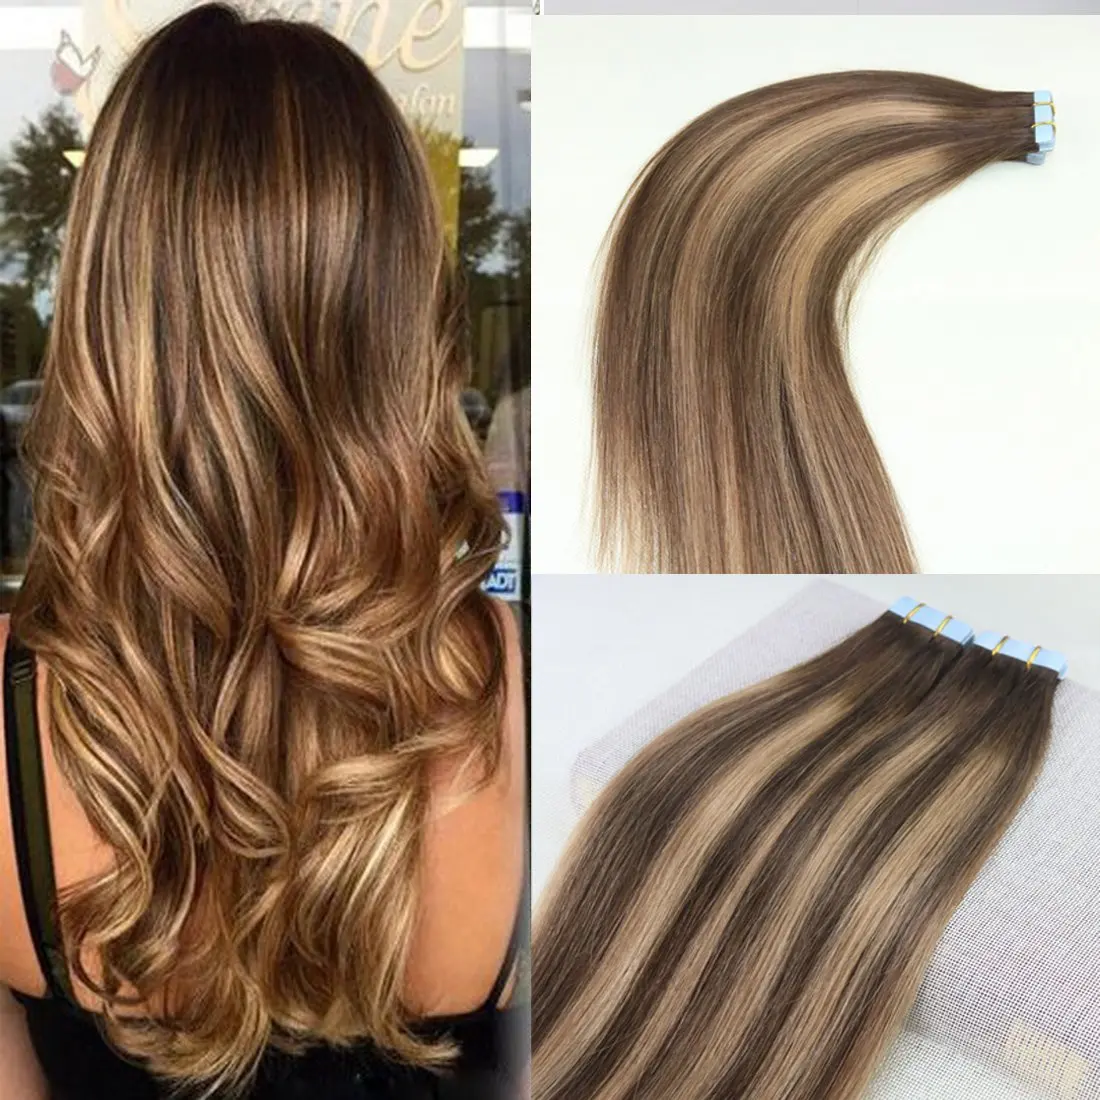 Buy Beautymiss 20 100g 40pcs Balayage Ombre Tape Hair Human Remy